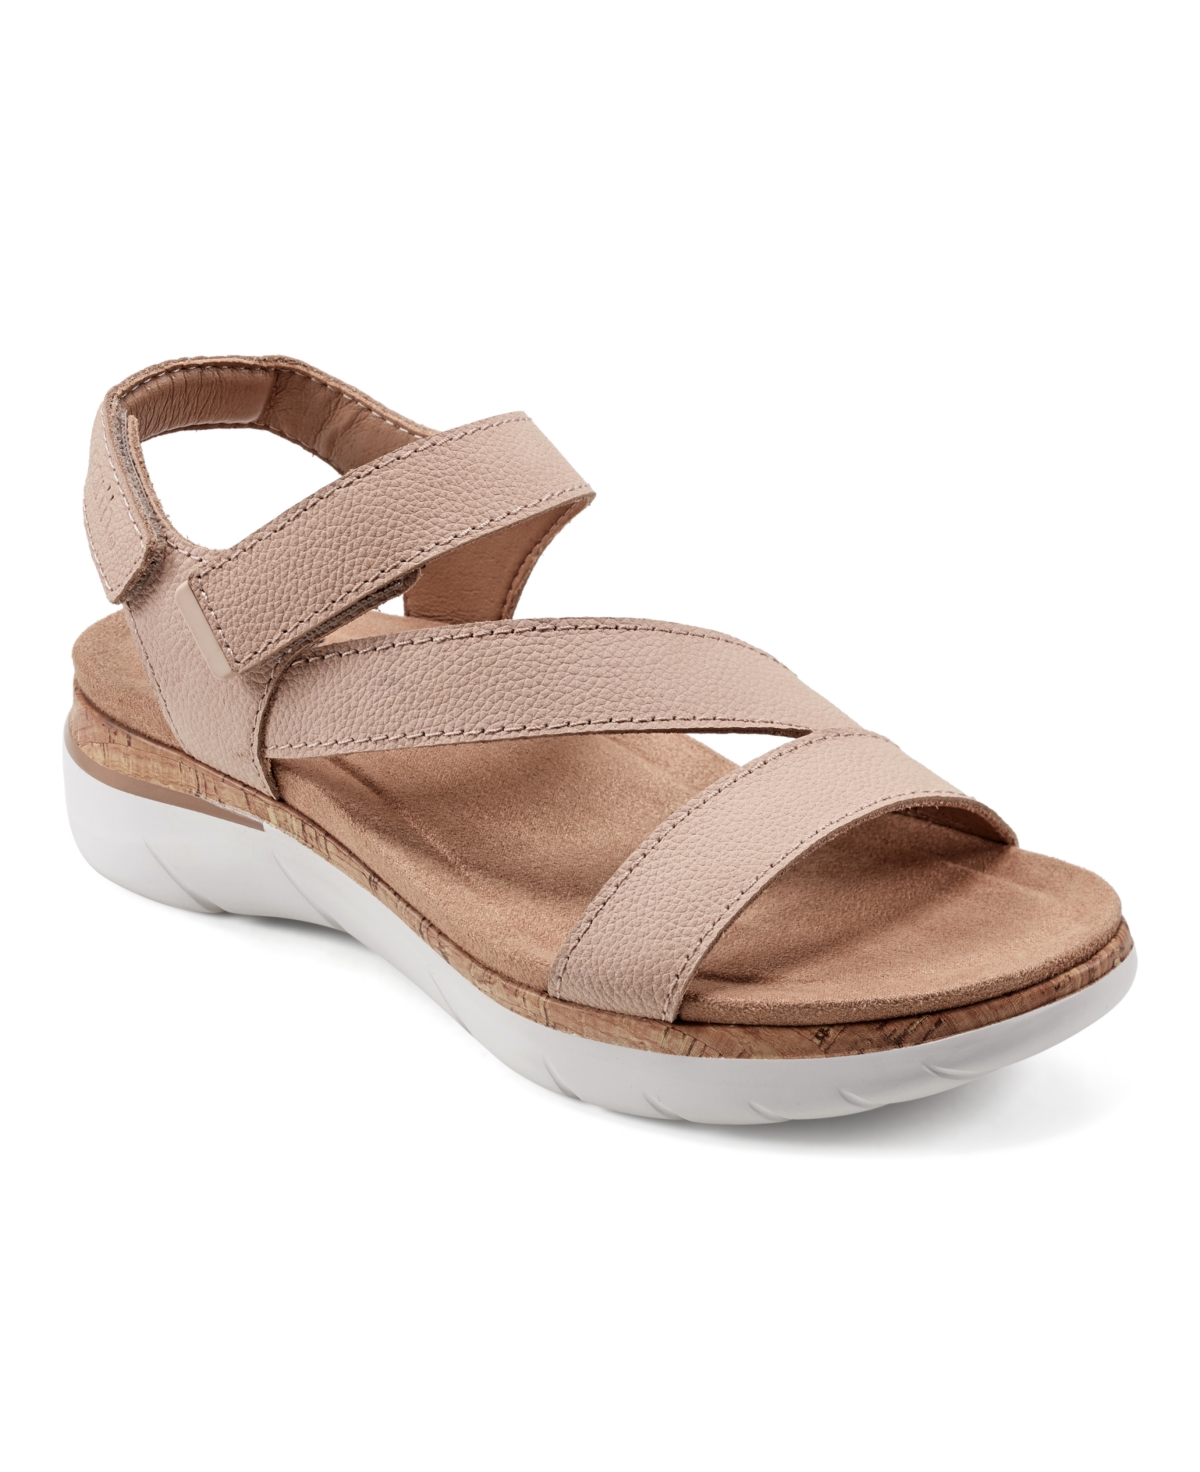 Shop Earth Women's Roni Almond Toe Flat Strappy Casual Sandals In Light Natural Nubuck